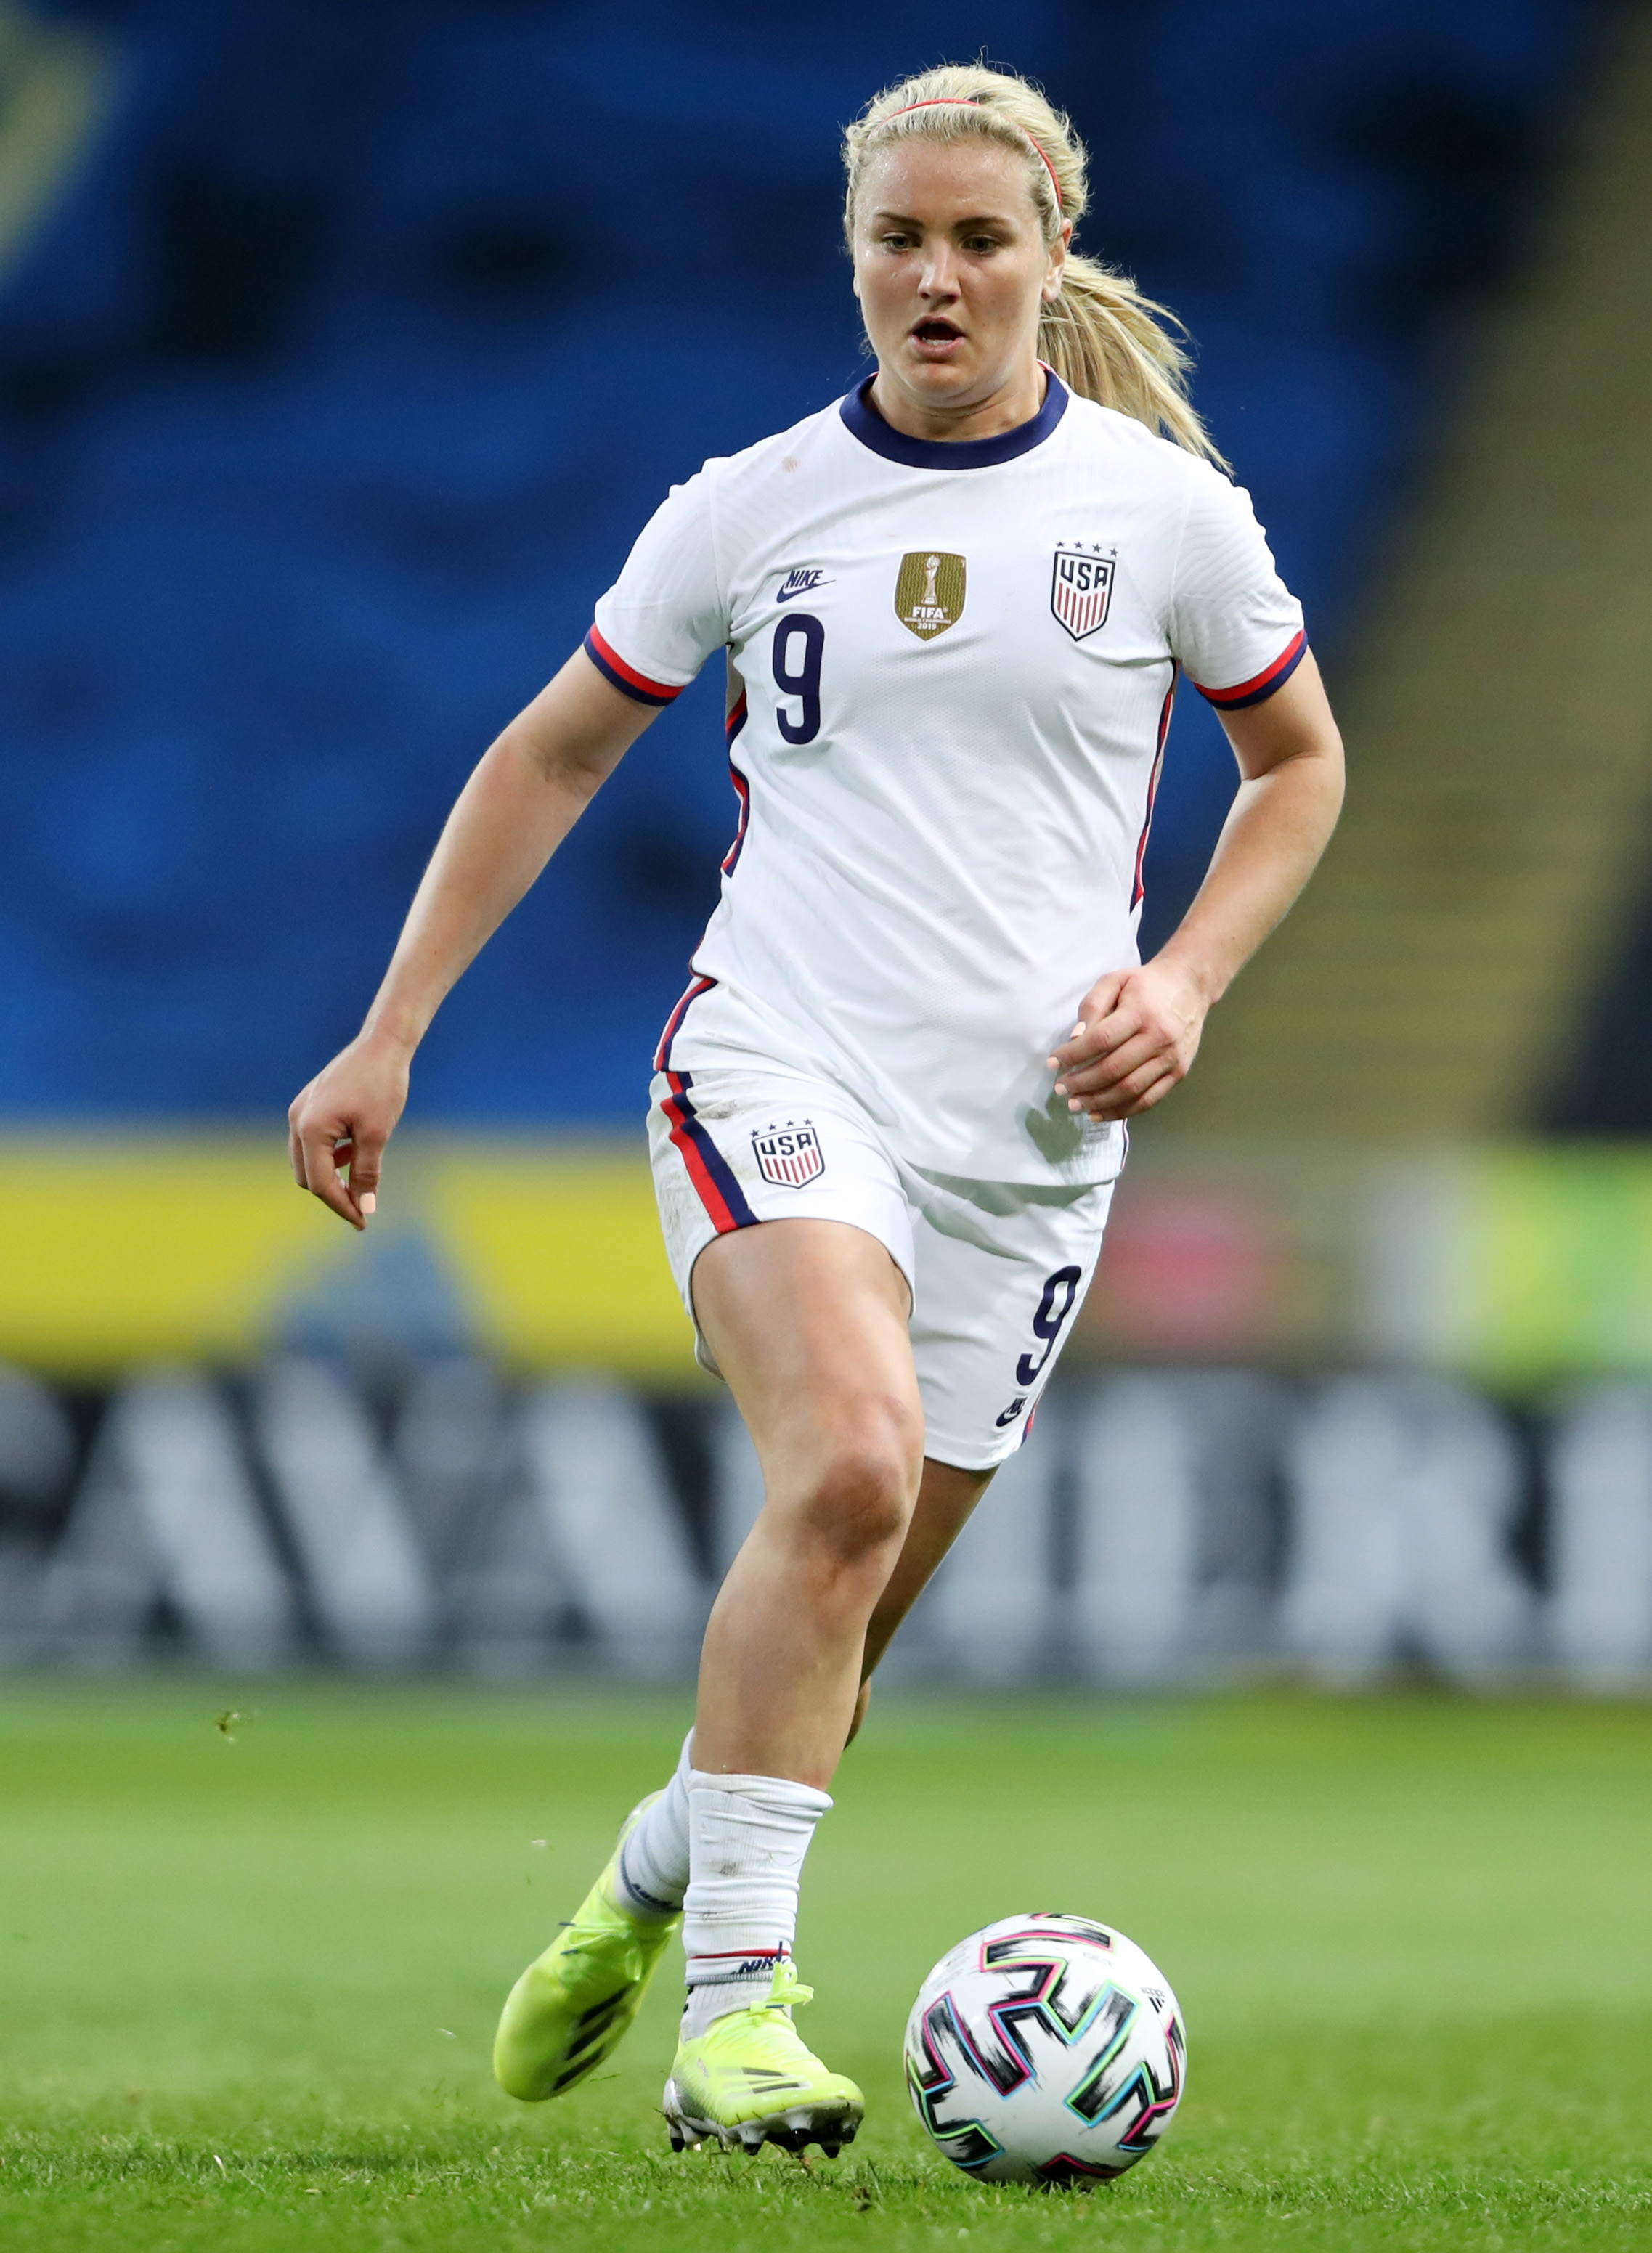 Lindsey Horan of United States runs with the ball during the Women's International Friendly match between Sweden and United States at Friends arena on April 10, 2021 in Solna, Sweden.